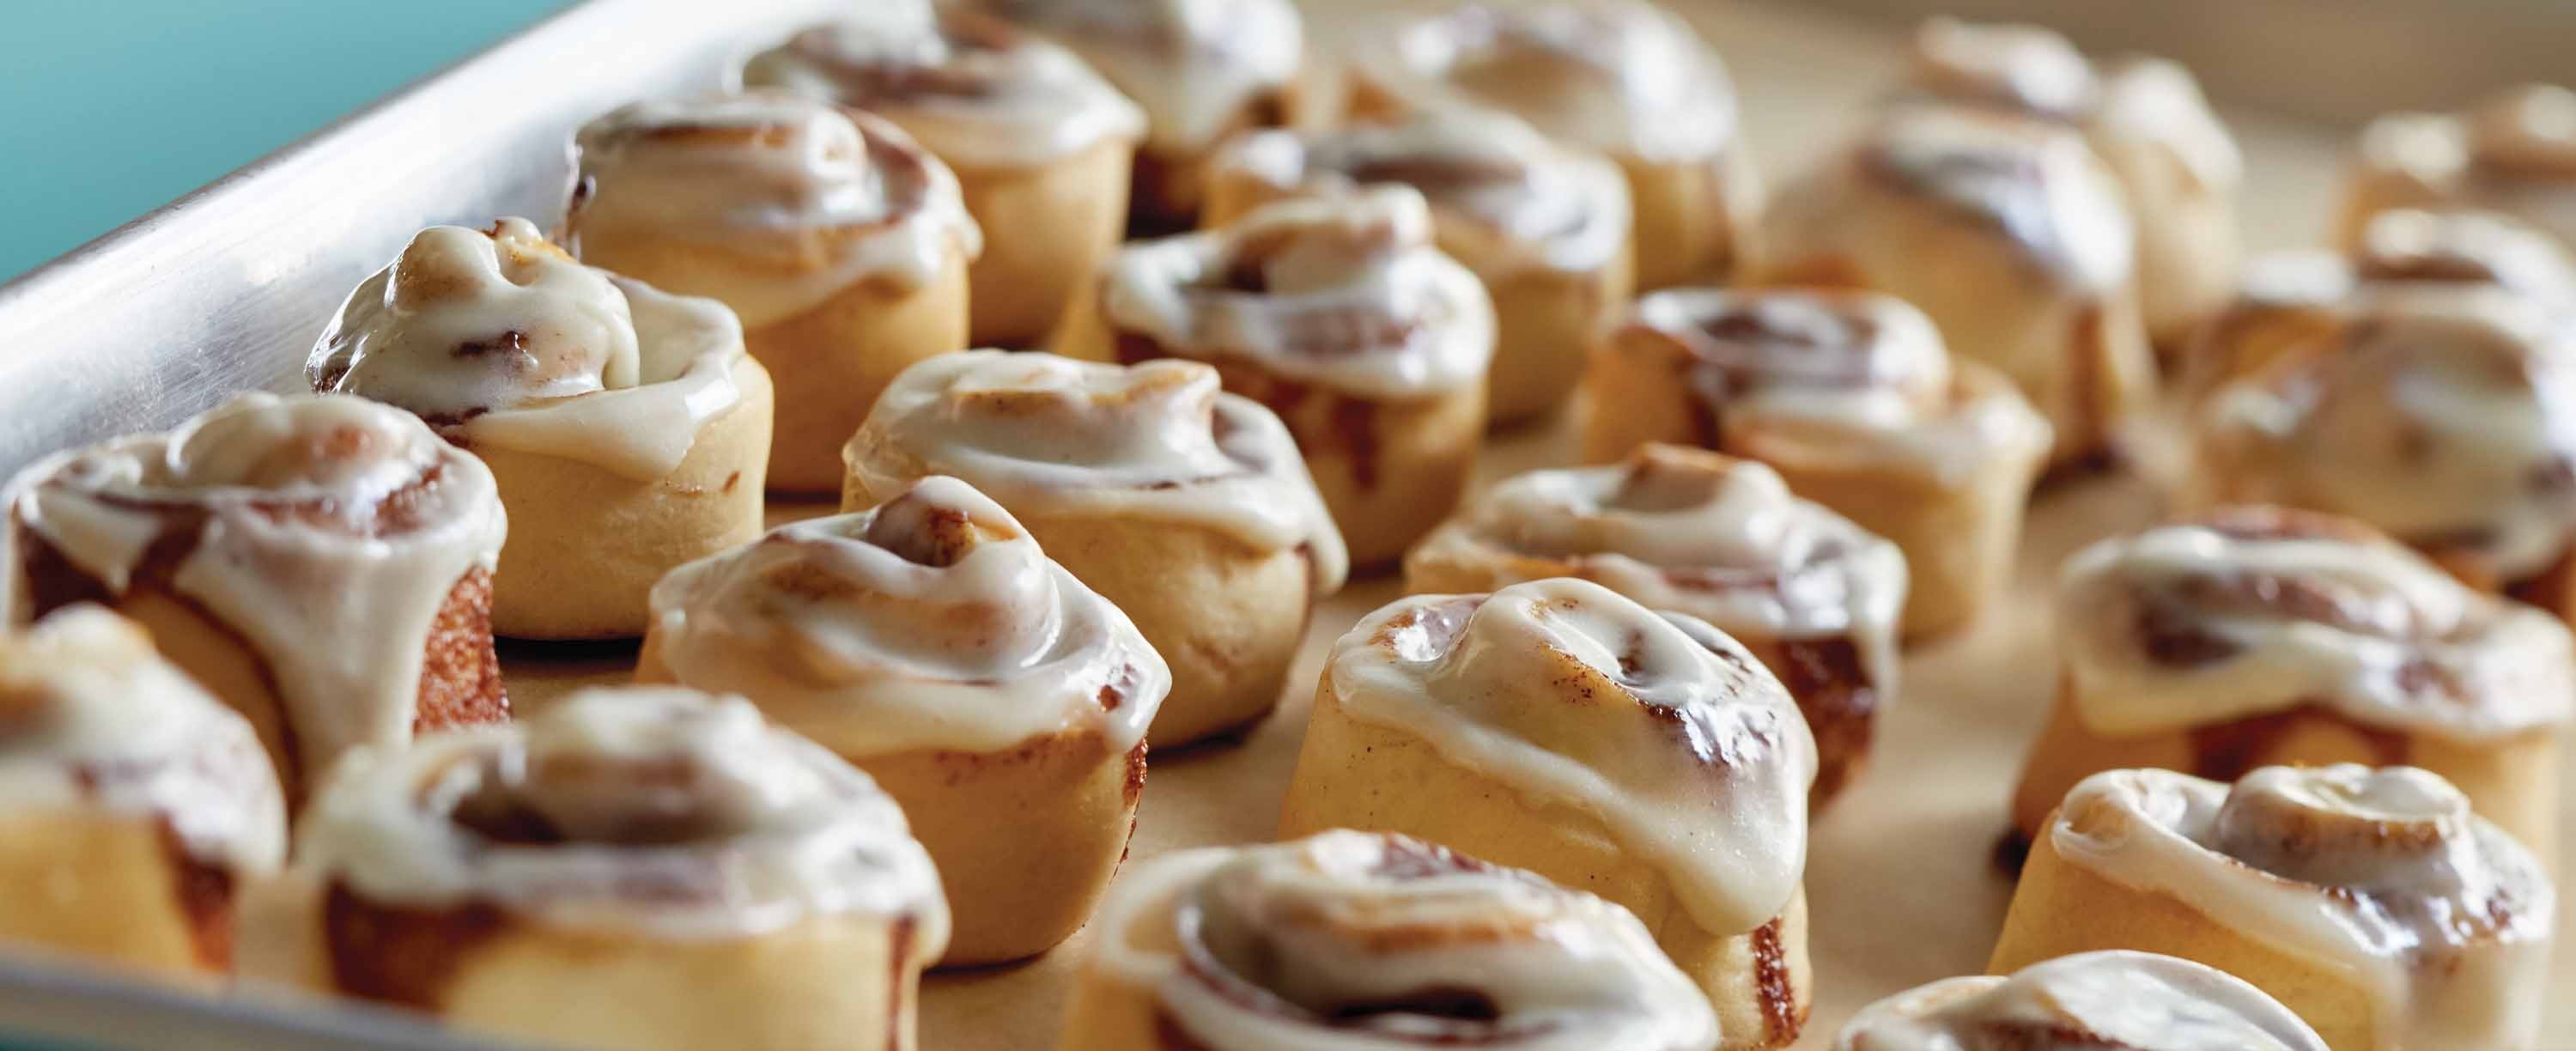 Cinnamon roll: Coiled into square- or round-shaped buns, Pastry. 3000x1230 Dual Screen Background.